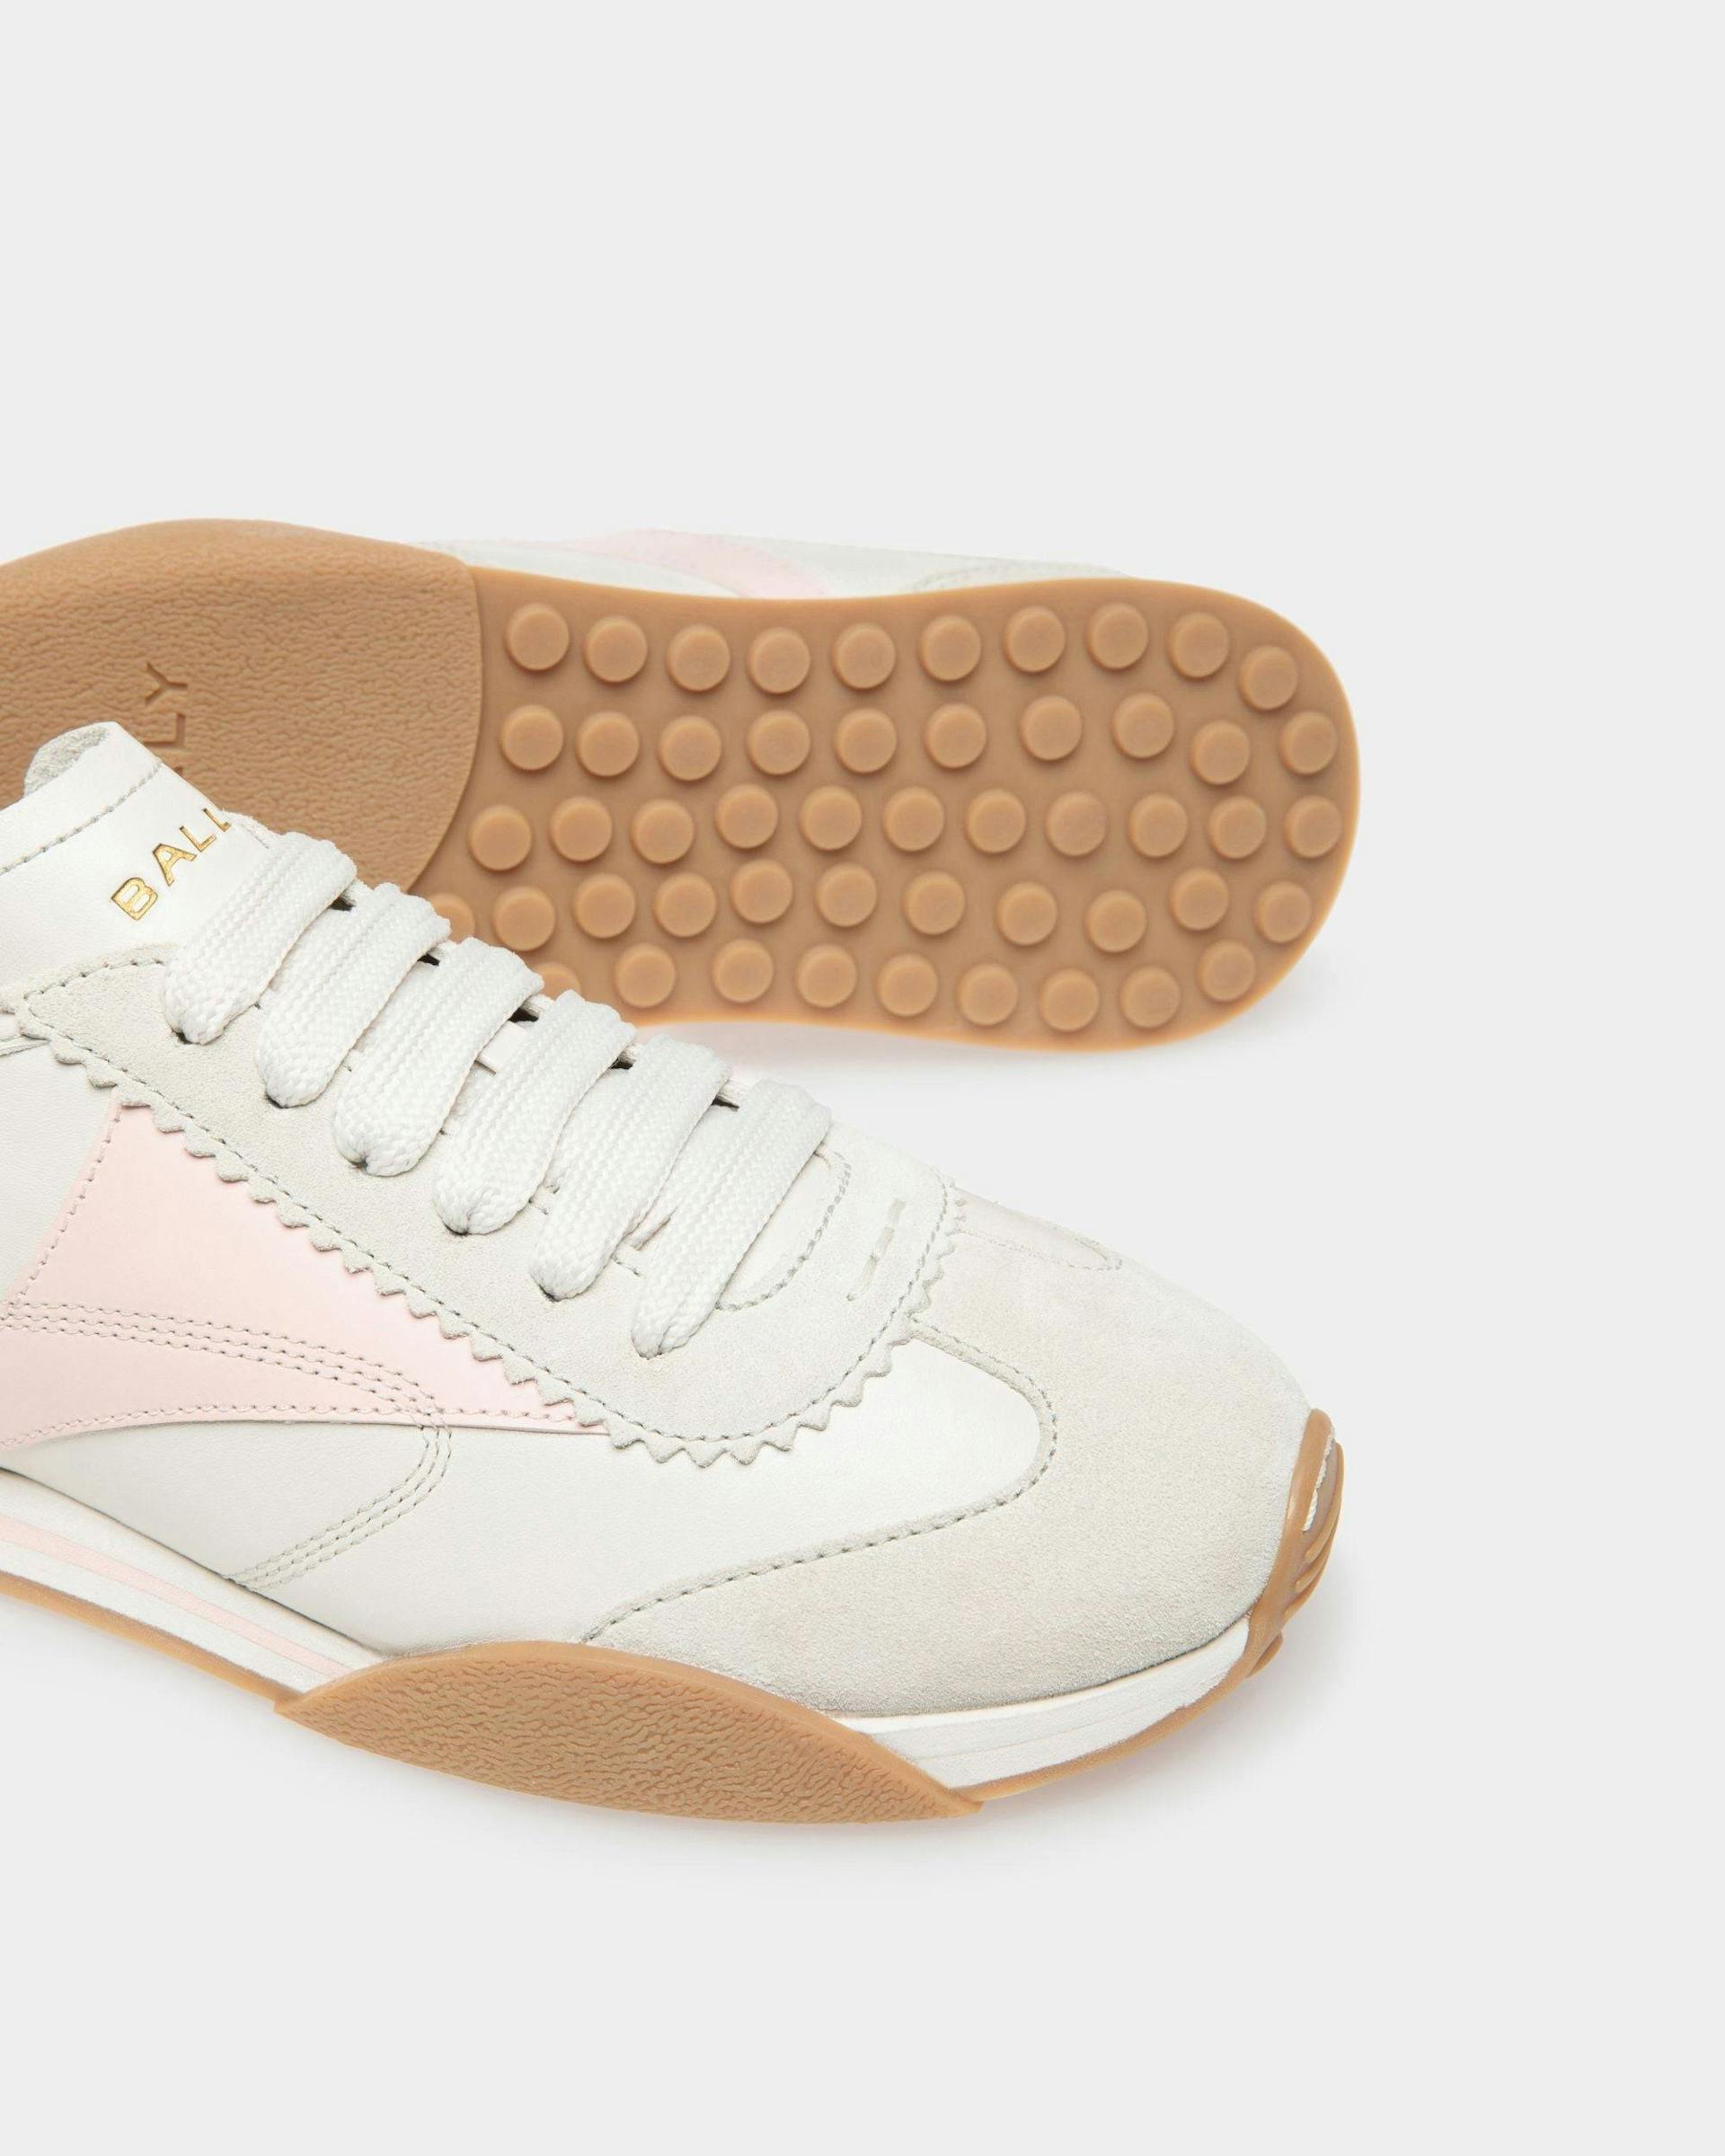 Sussex Sneakers In Dusty White And Rose Leather - Women's - Bally - 04